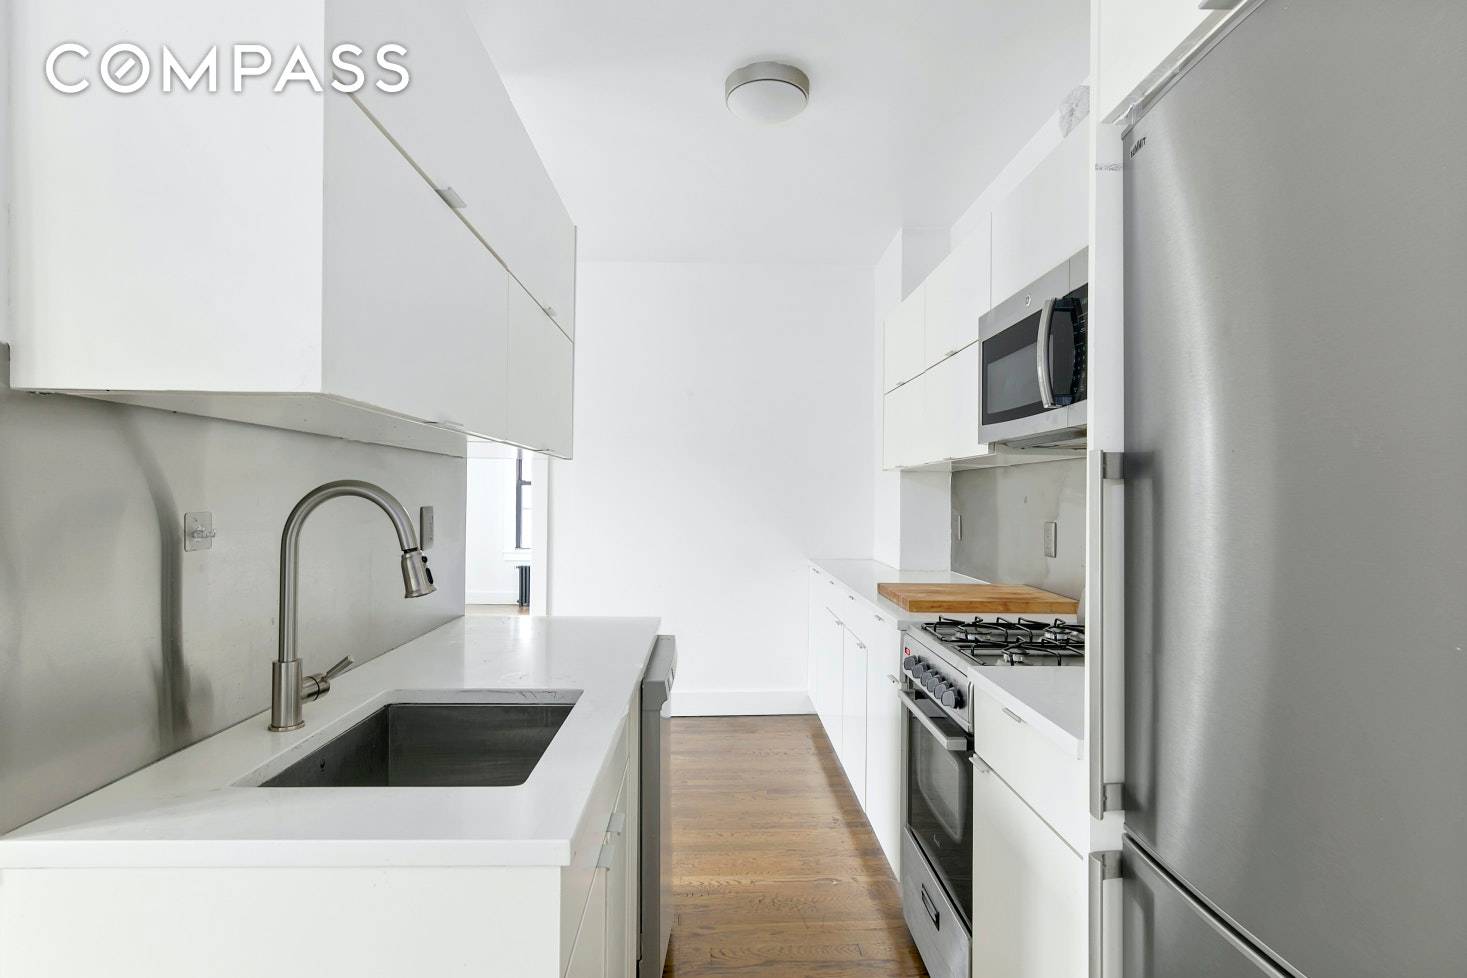 CYOF, Agent shows unit. Newly renovated, spacious 2 bedroom apartment in Astoria, Queens.